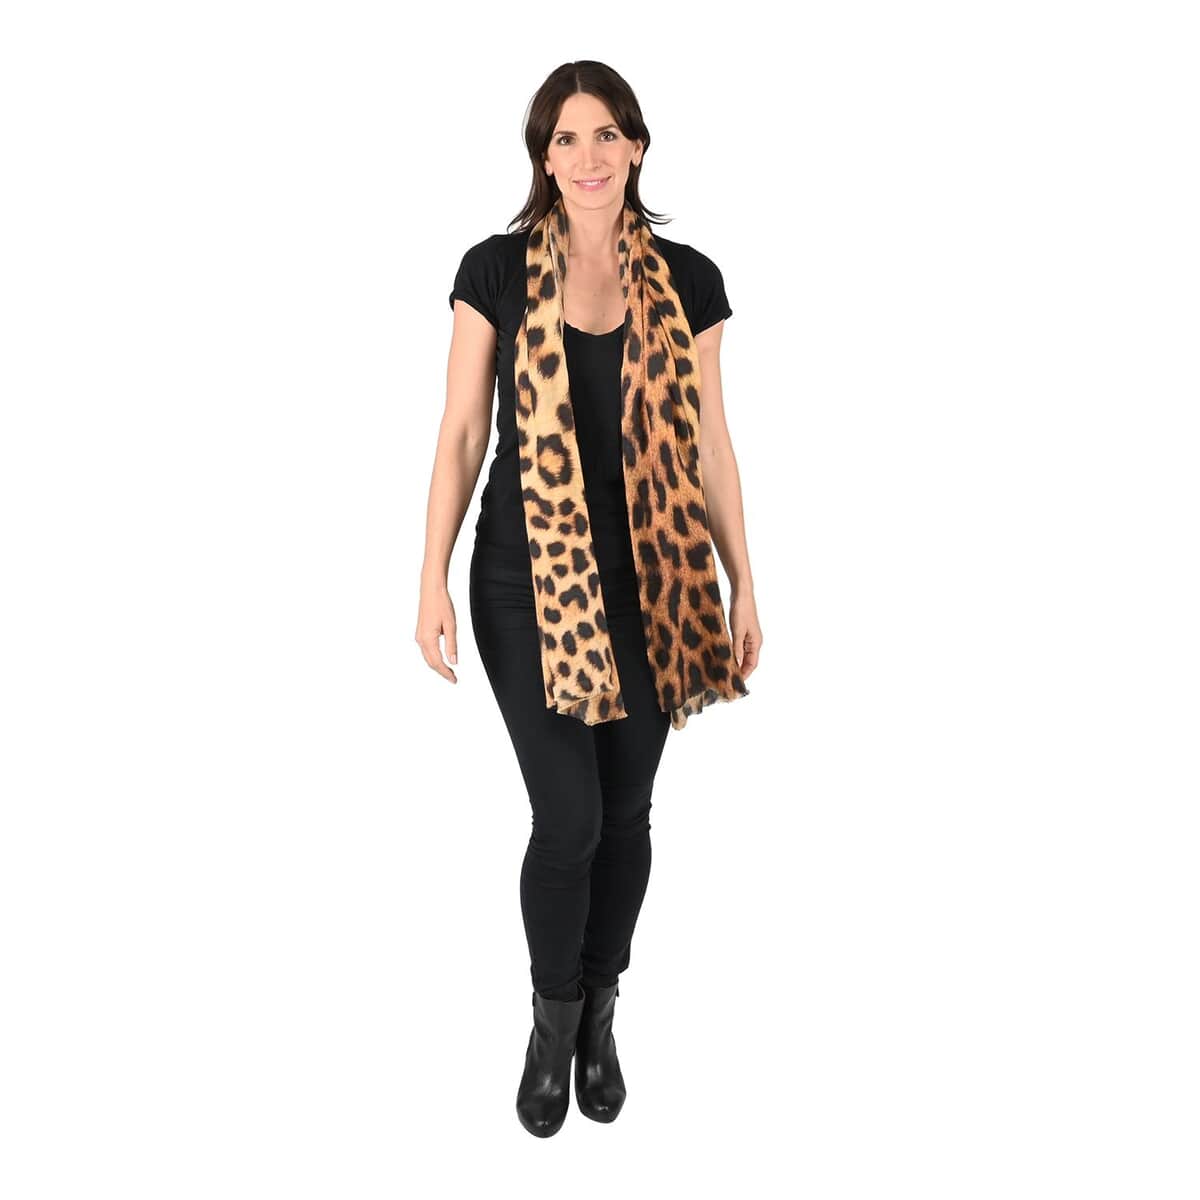 TAMSY Brown Leopard Printed Cashmere Wool Scarf (28"x78") image number 0